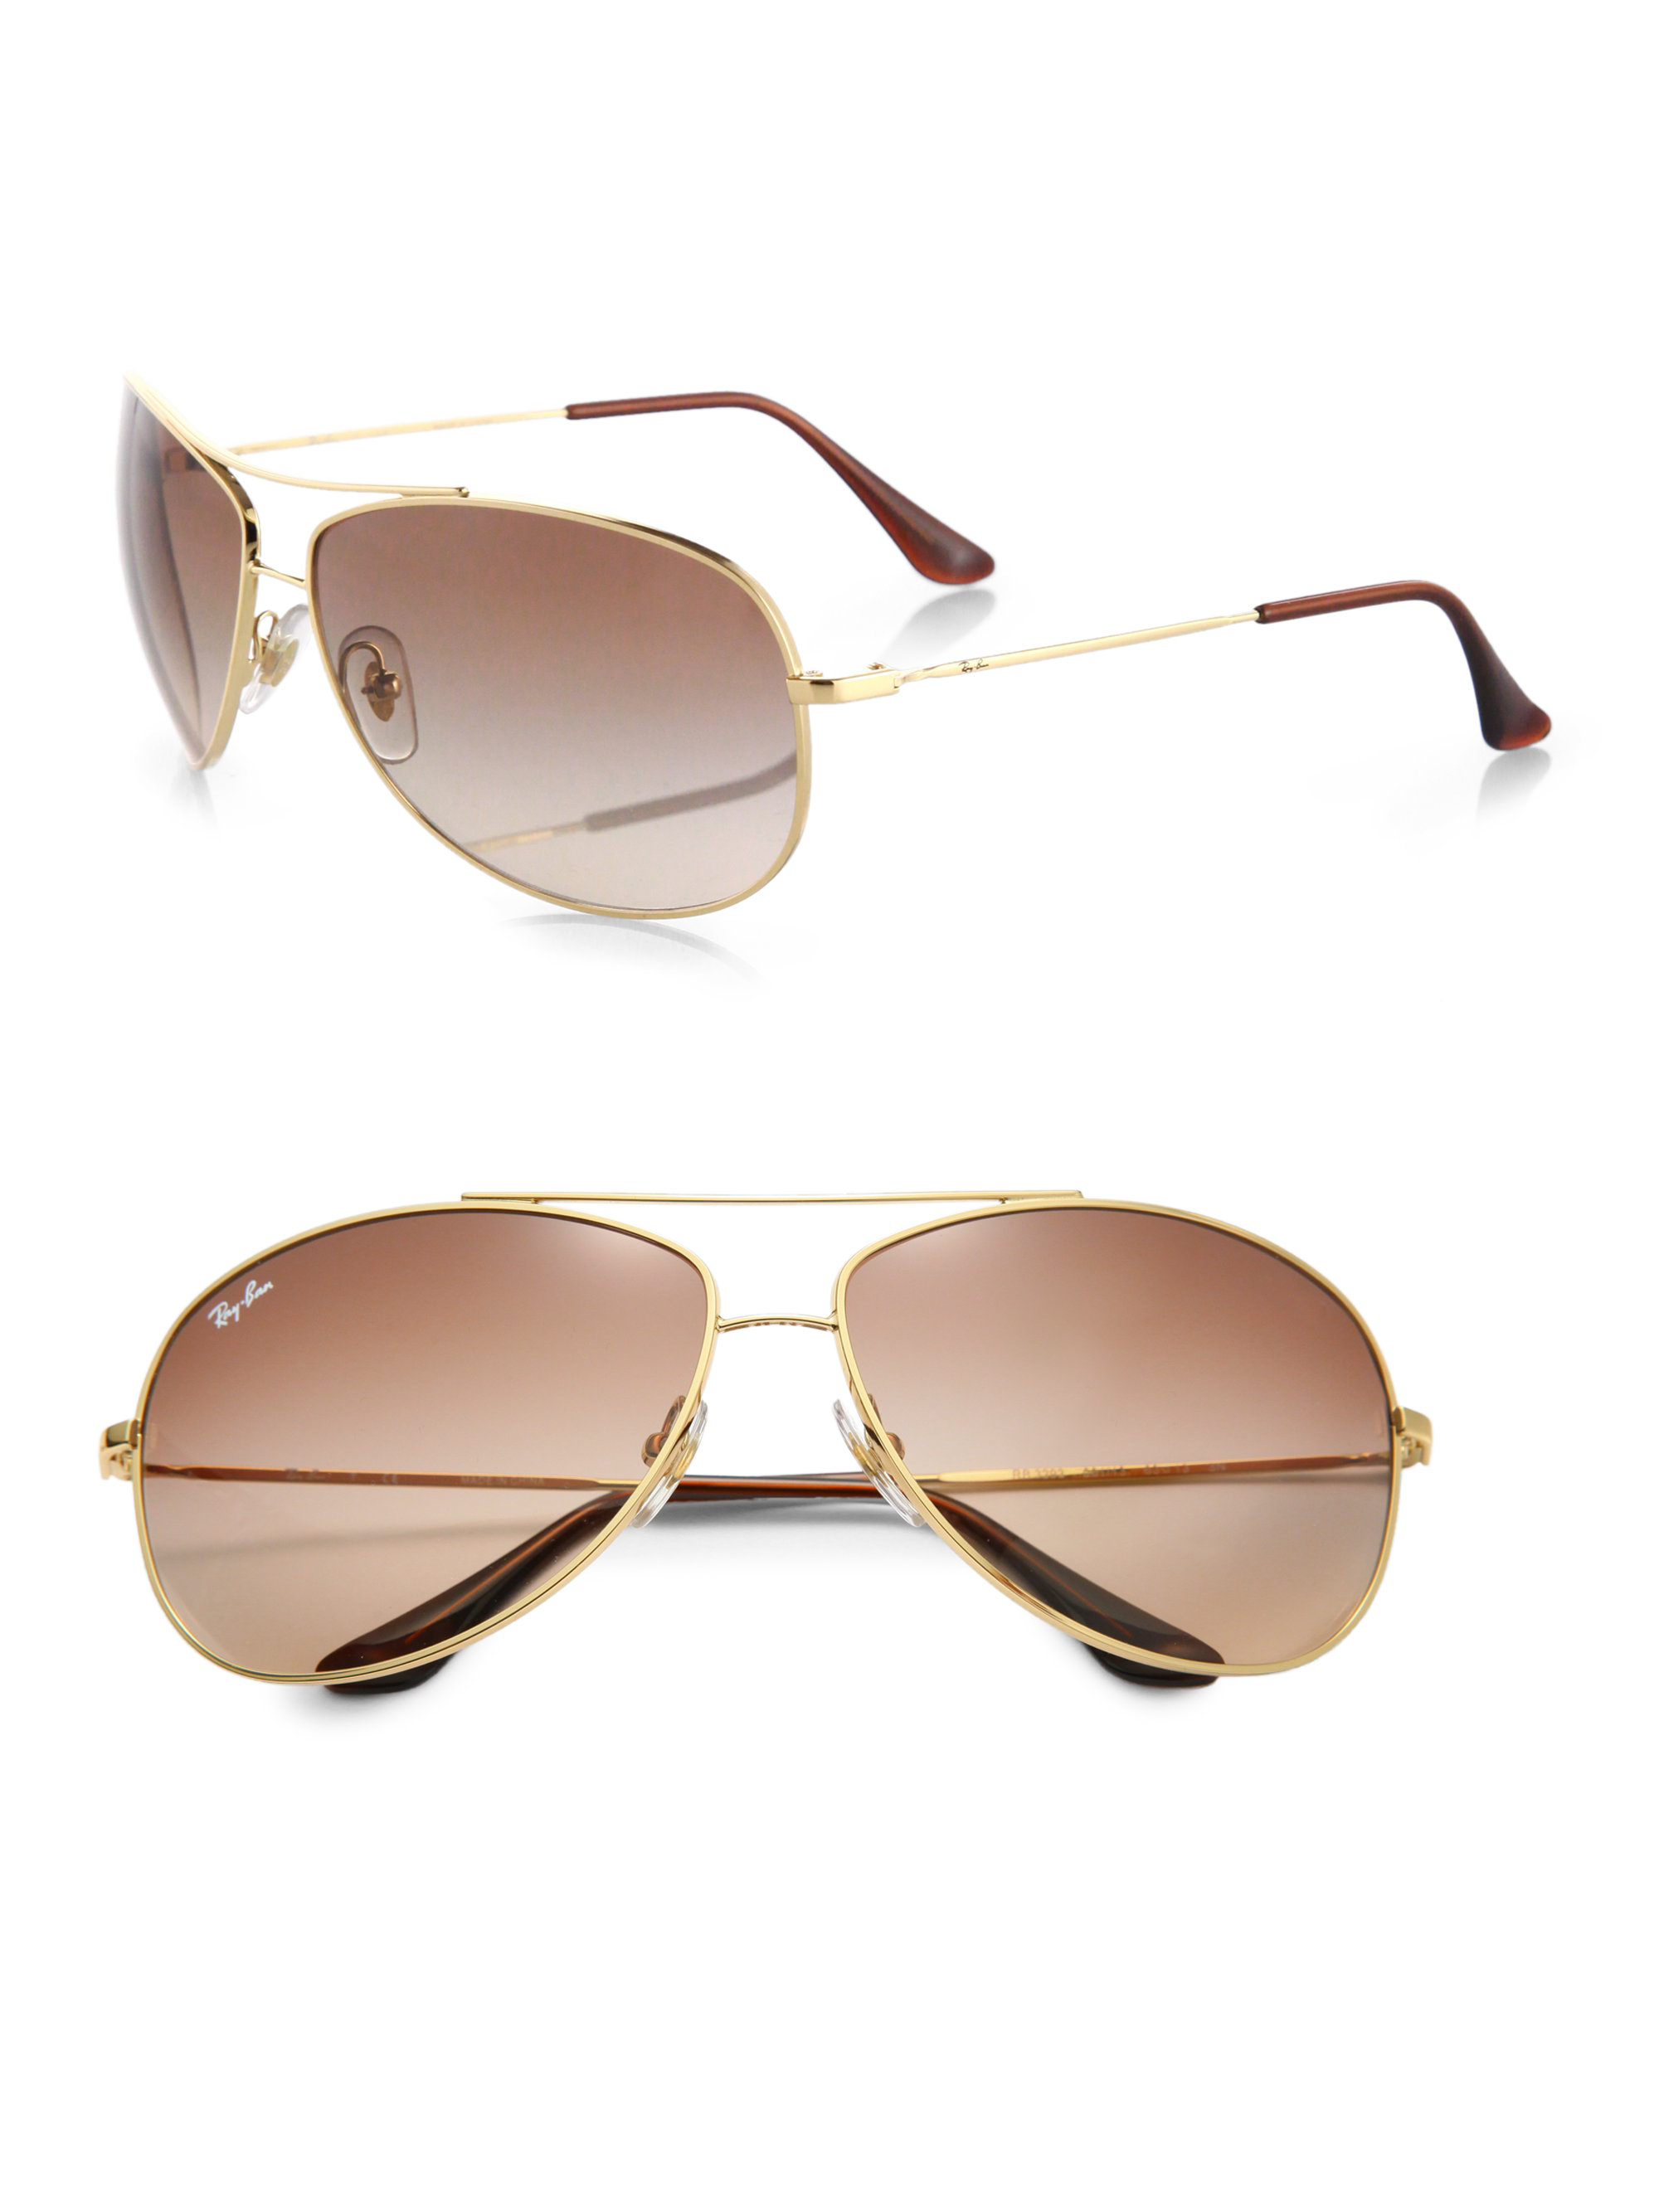 Ray-Ban Buble Wrap Aviator Sunglasses in Gold (Metallic) for Men - Lyst